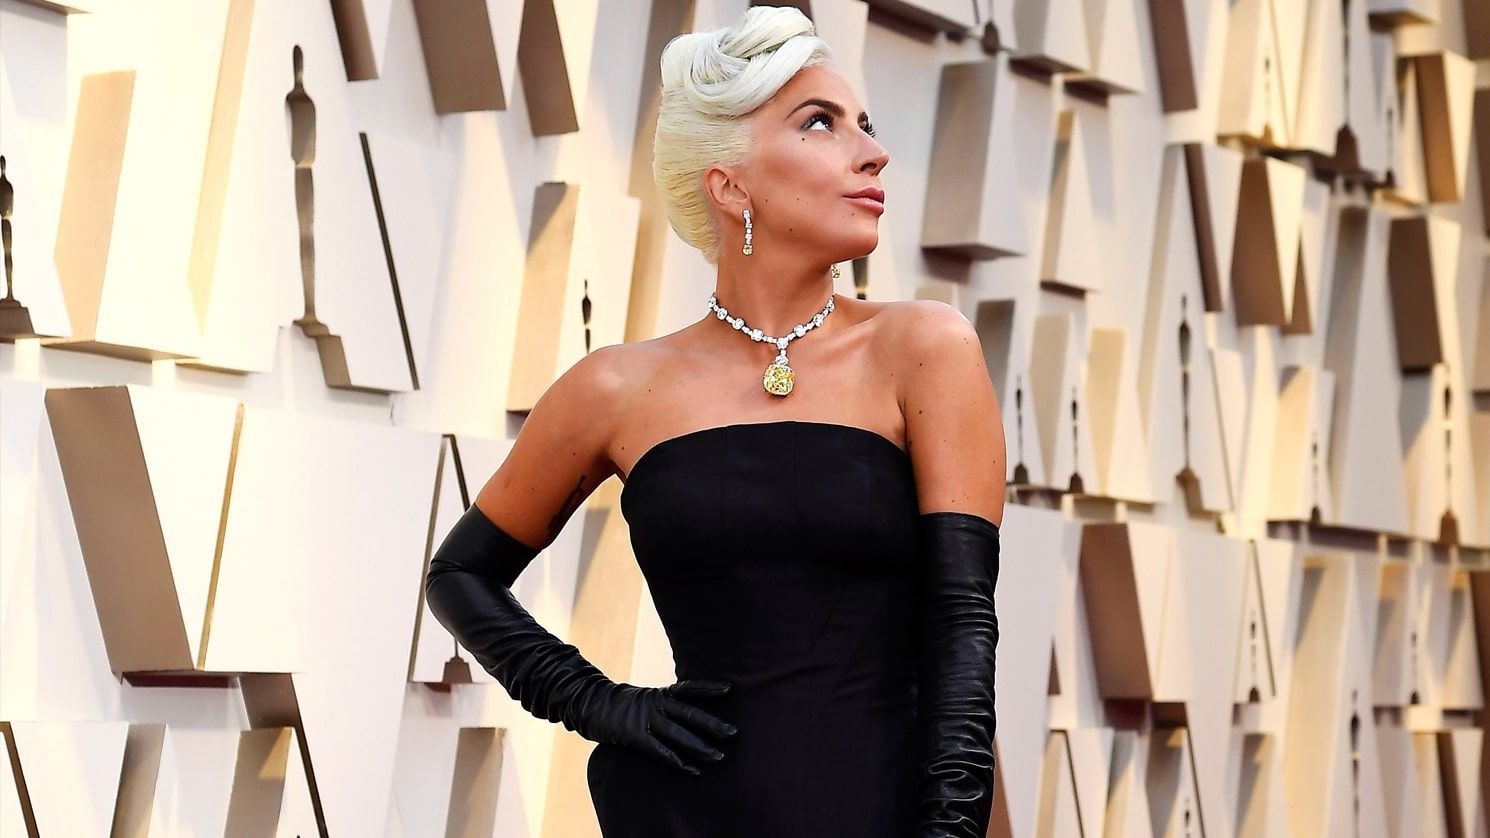 Oscars 2019: Lady Gaga makes history with the world’s largest yellow diamond